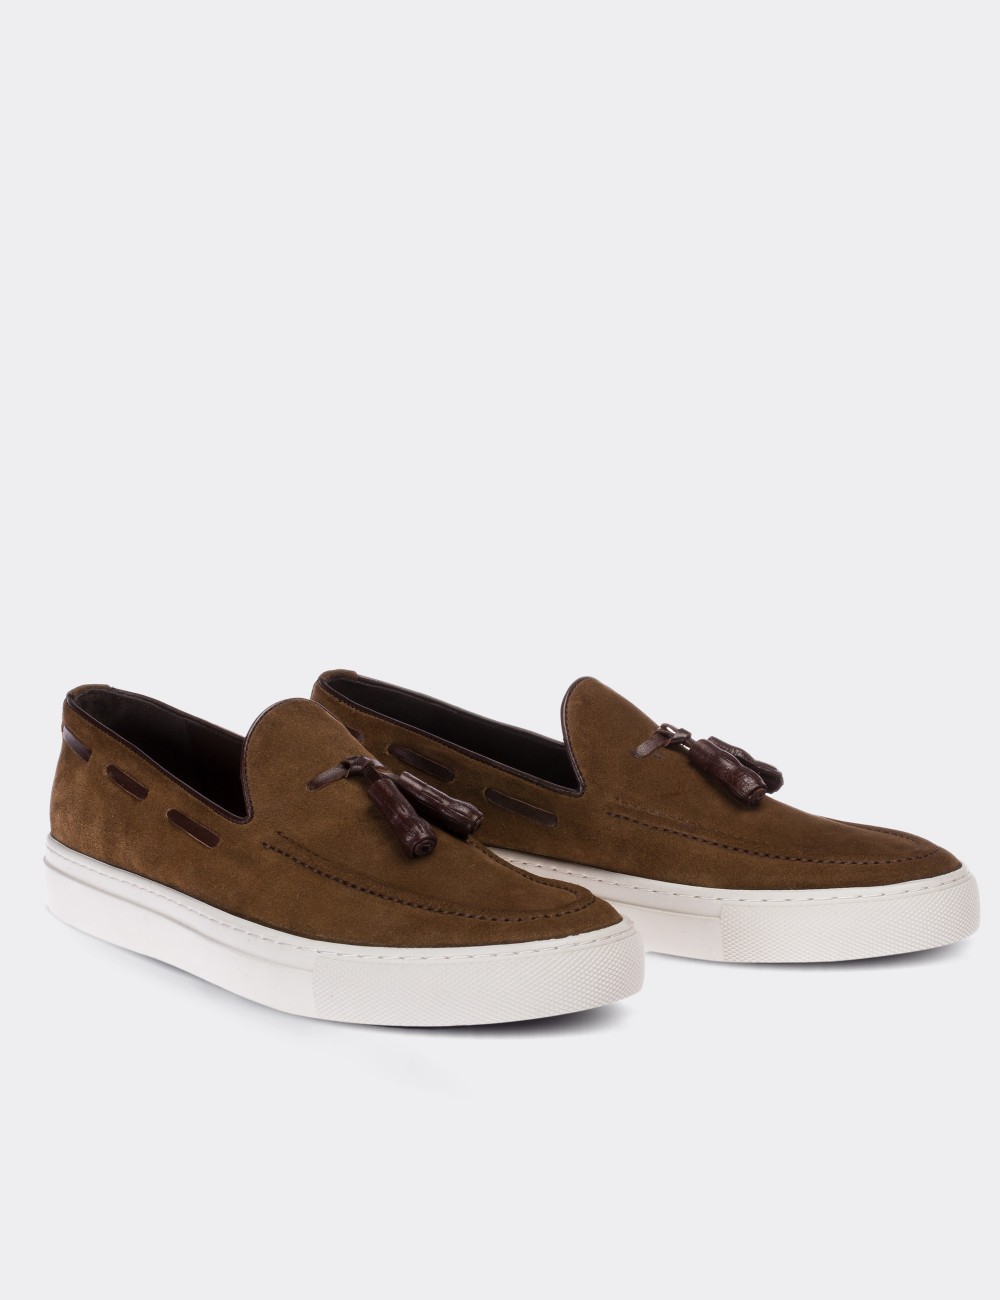 Tan Suede Leather Loafers - 01713MTBAC01